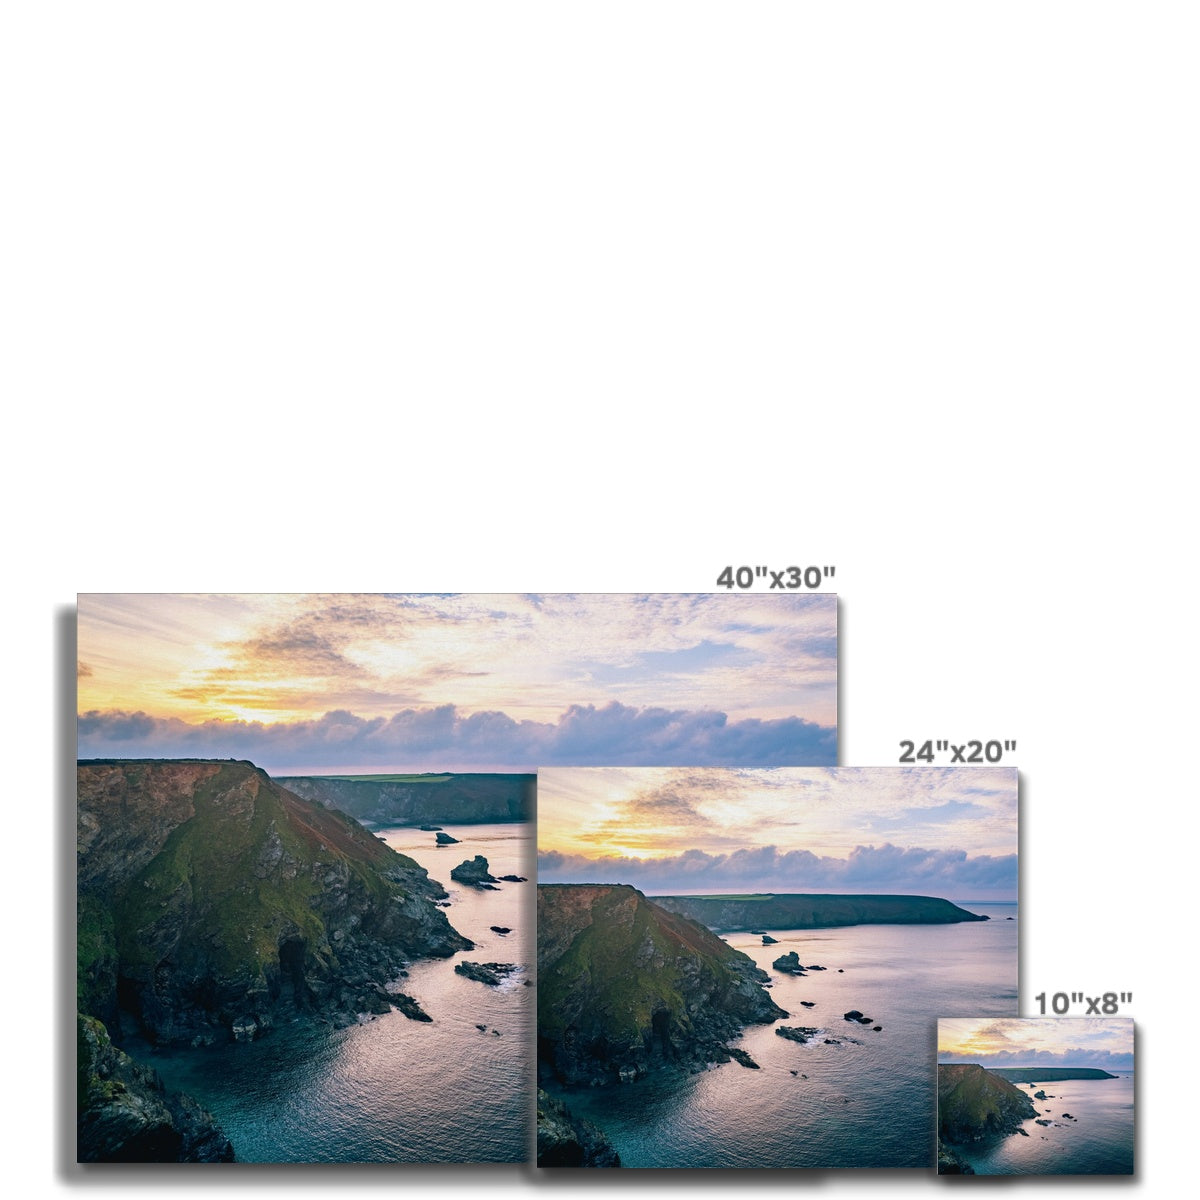 hells mouth canvas sizes